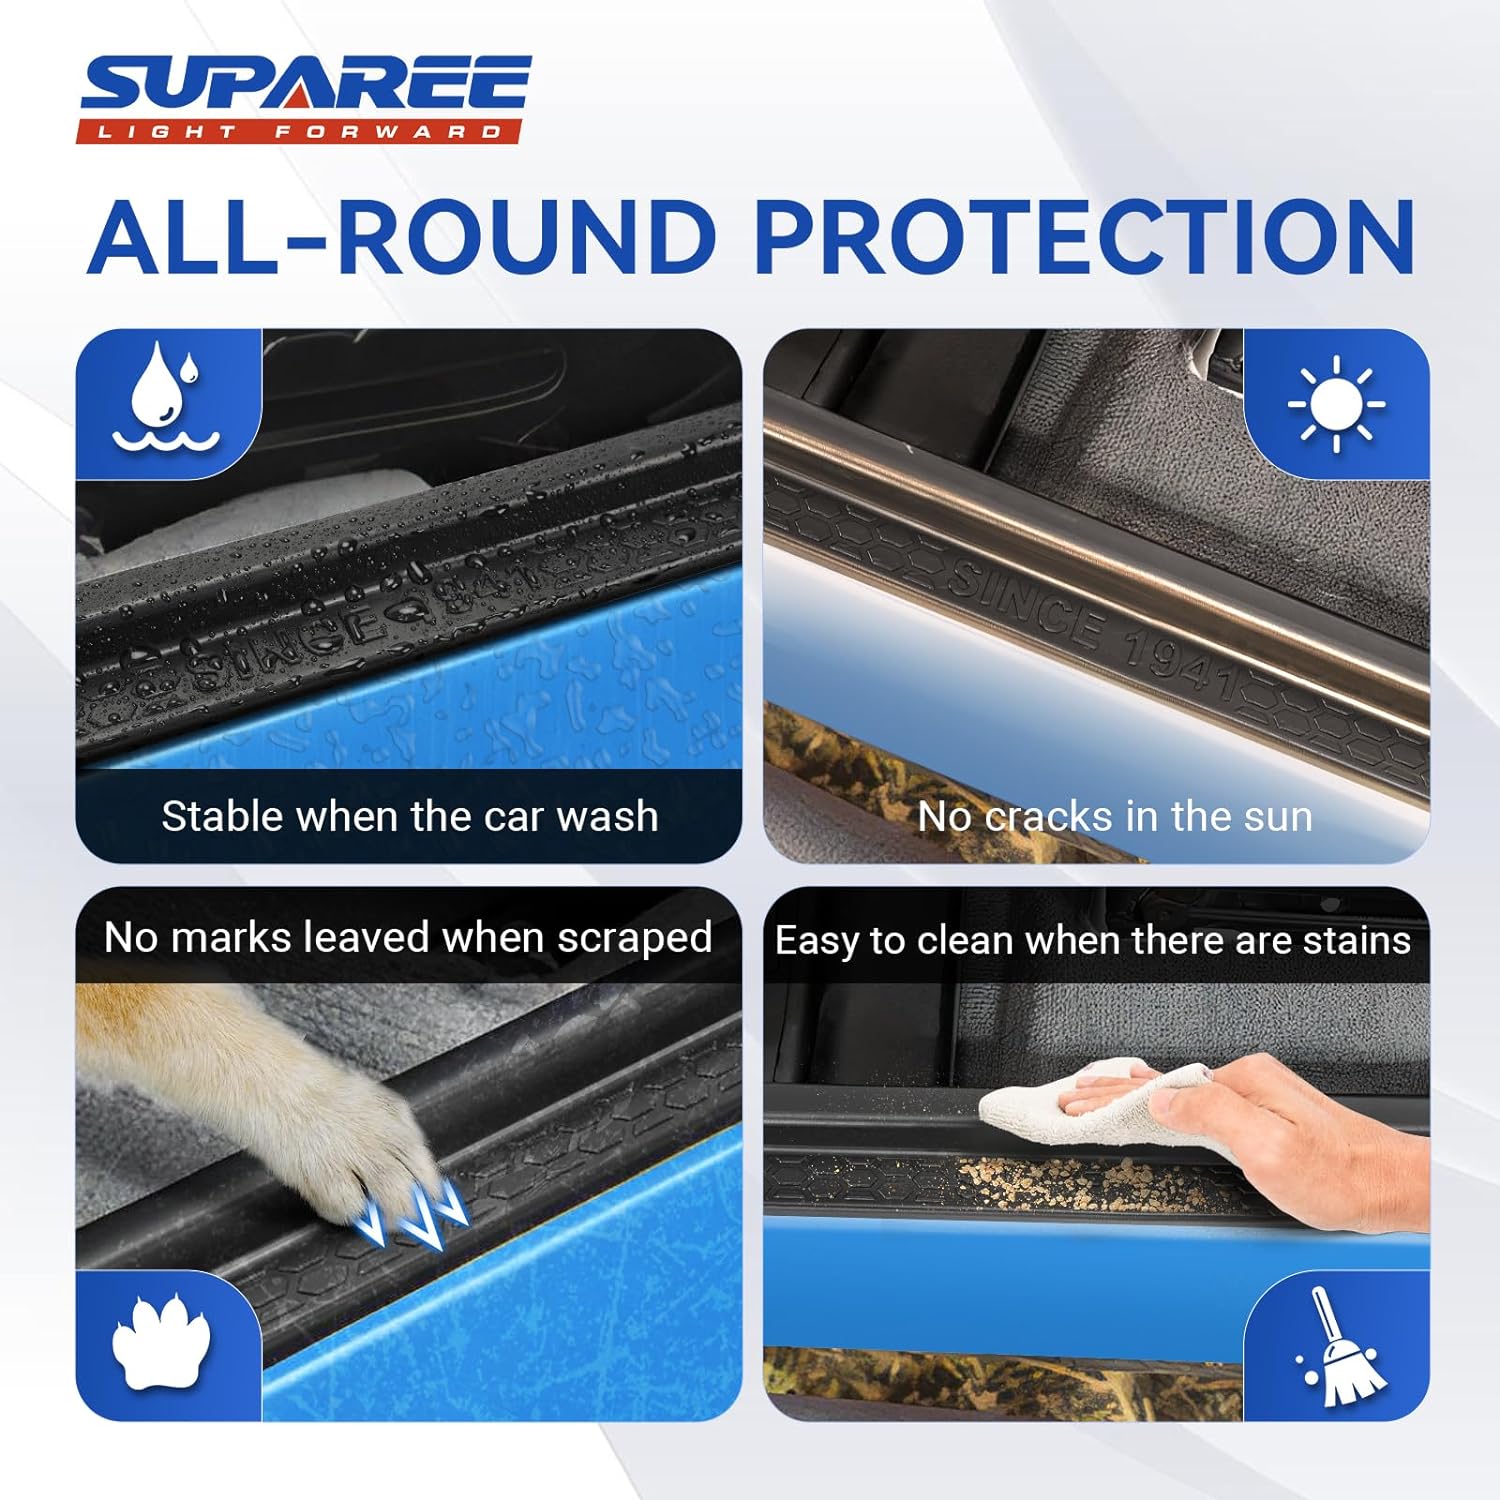 SUPAREE Jeep Door Sill Guards Suparee Jeep Door Sill Guards Kit with Logo 1941 for 1997-2006 Wrangler TJ 2-Door Product description